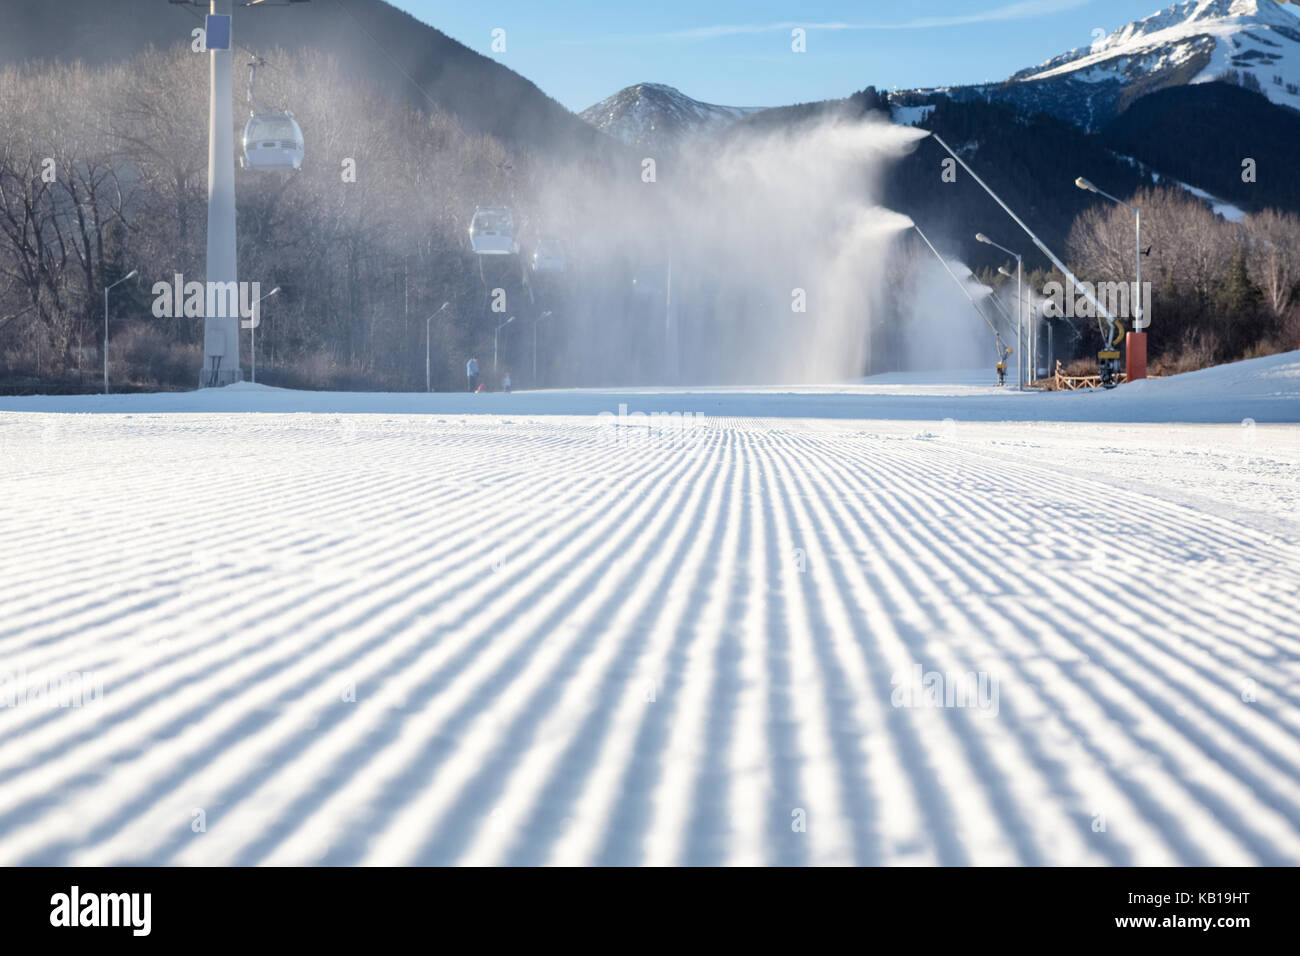 perfectly groomed empty ski run with snow cannon which is making powder snow Stock Photo